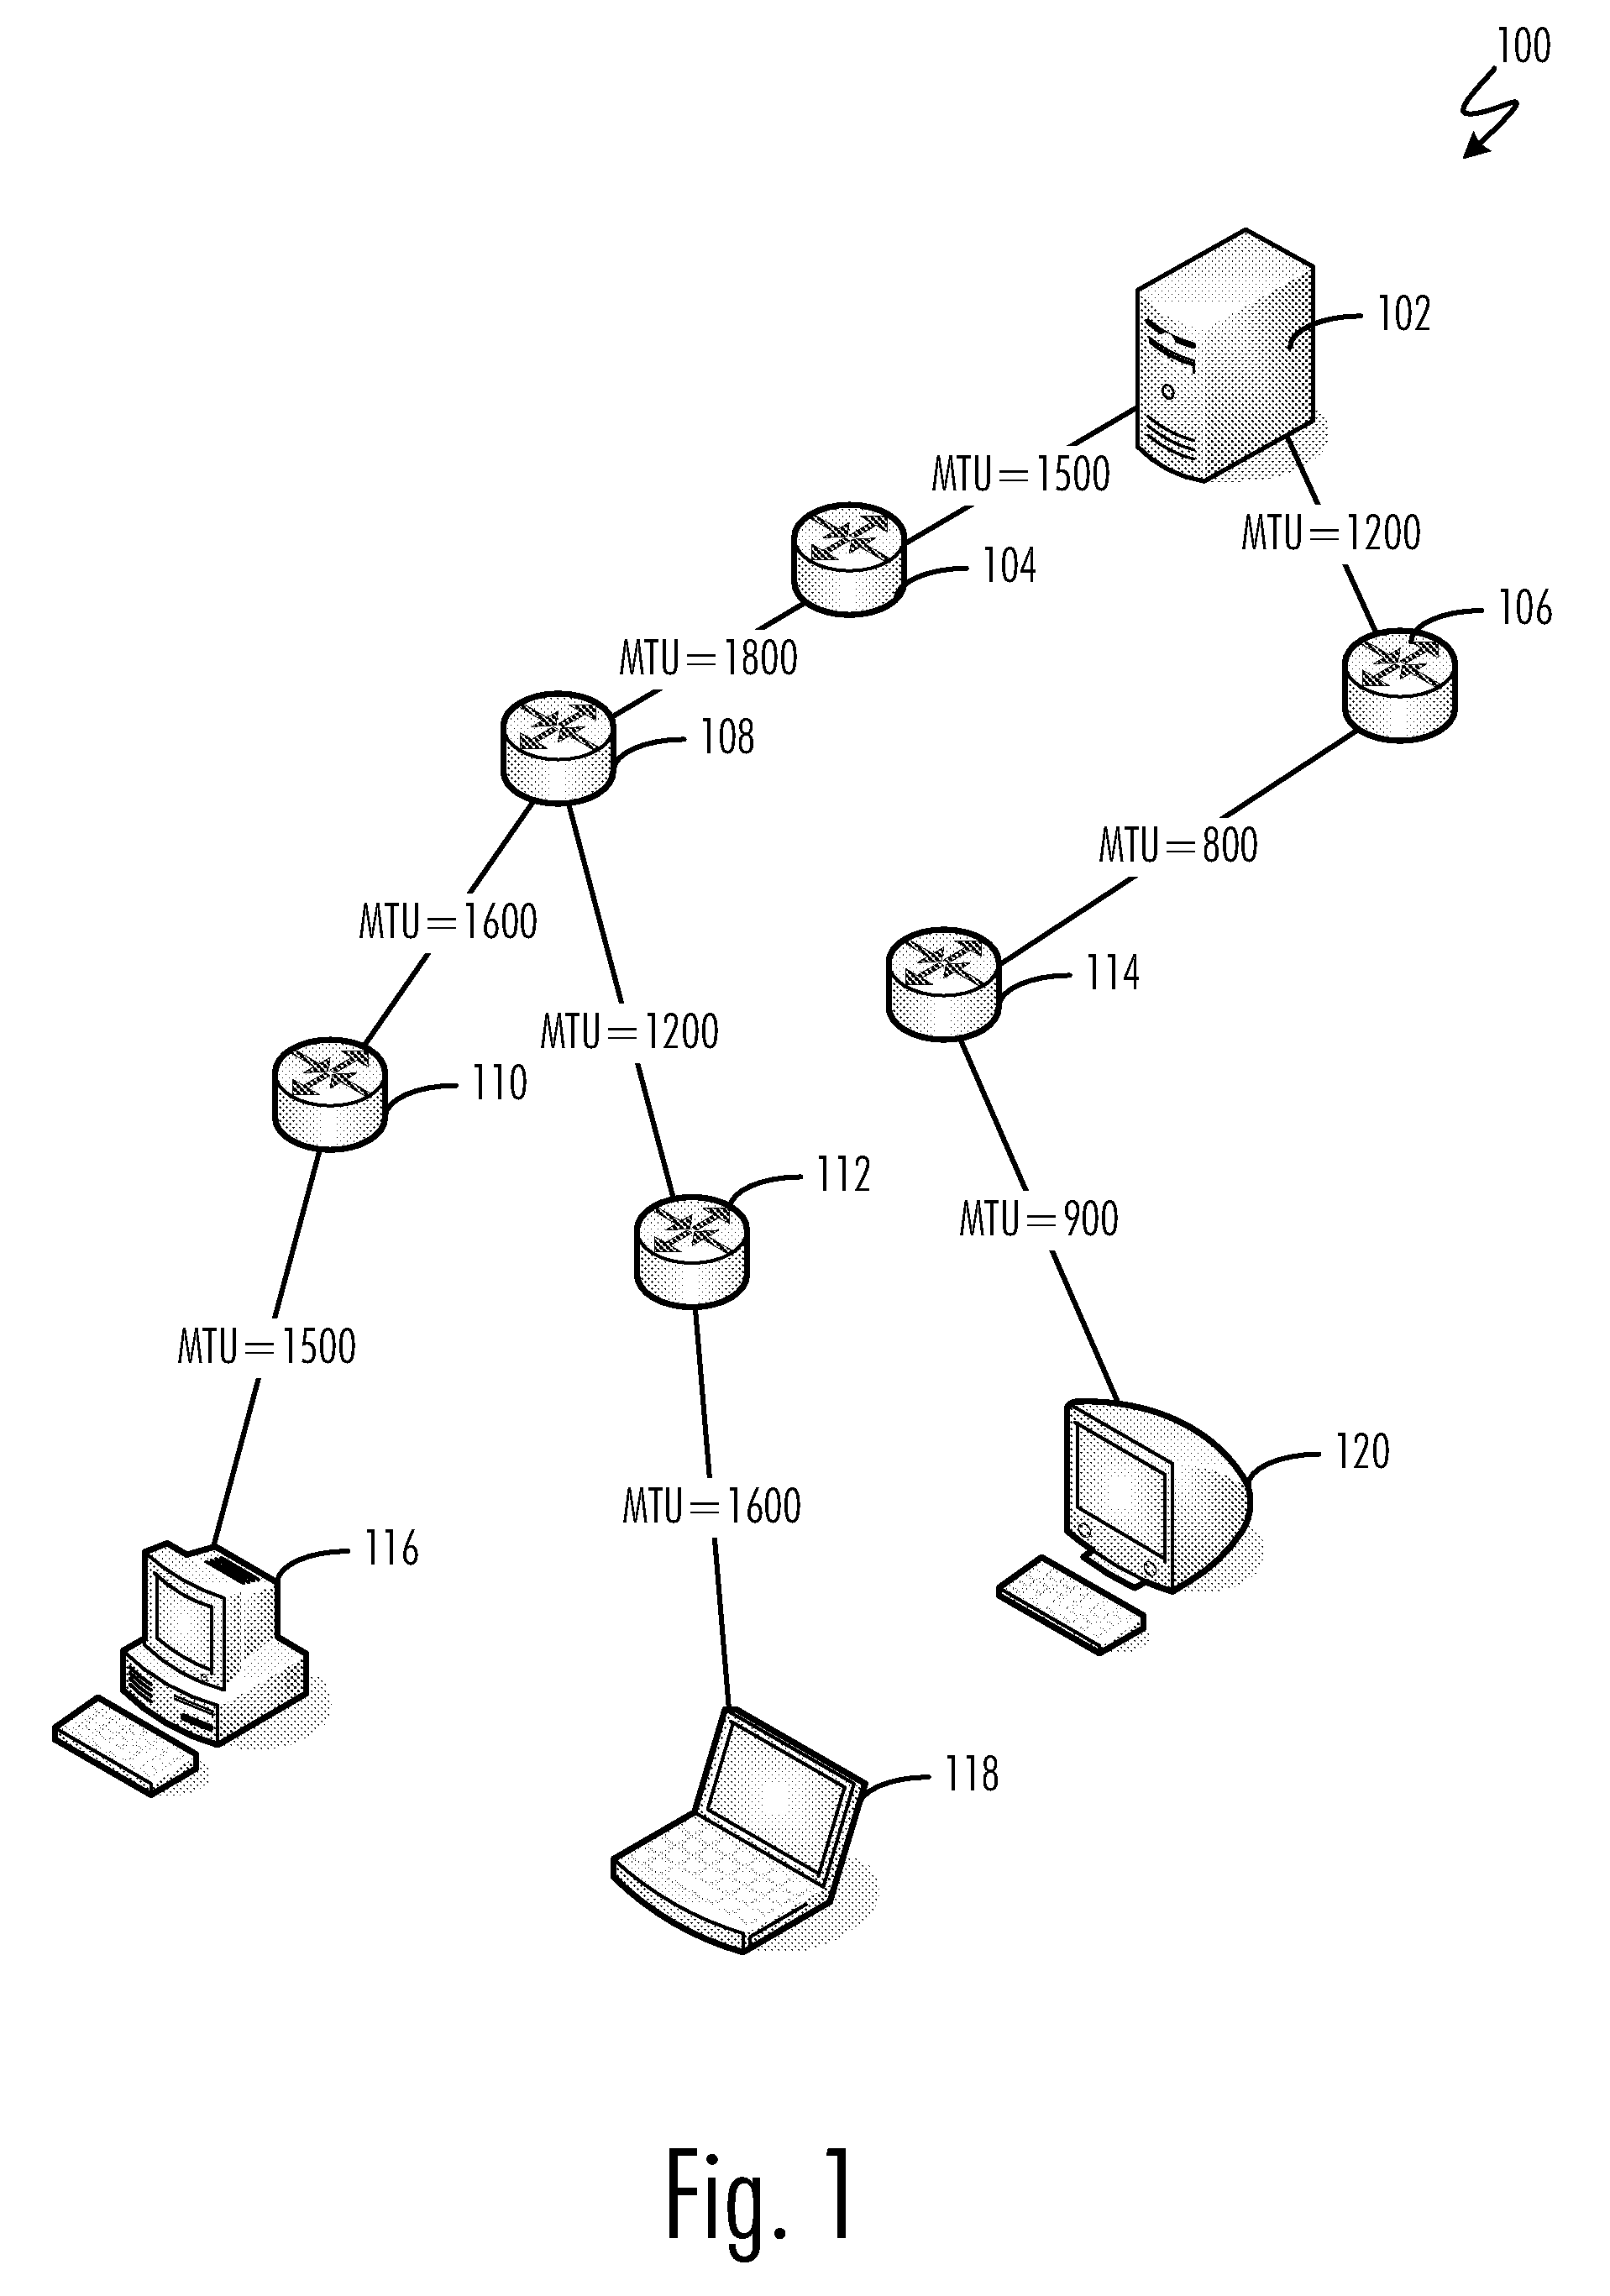 Method and Apparatus for Efficient Path MTU Information Discovery and Storage